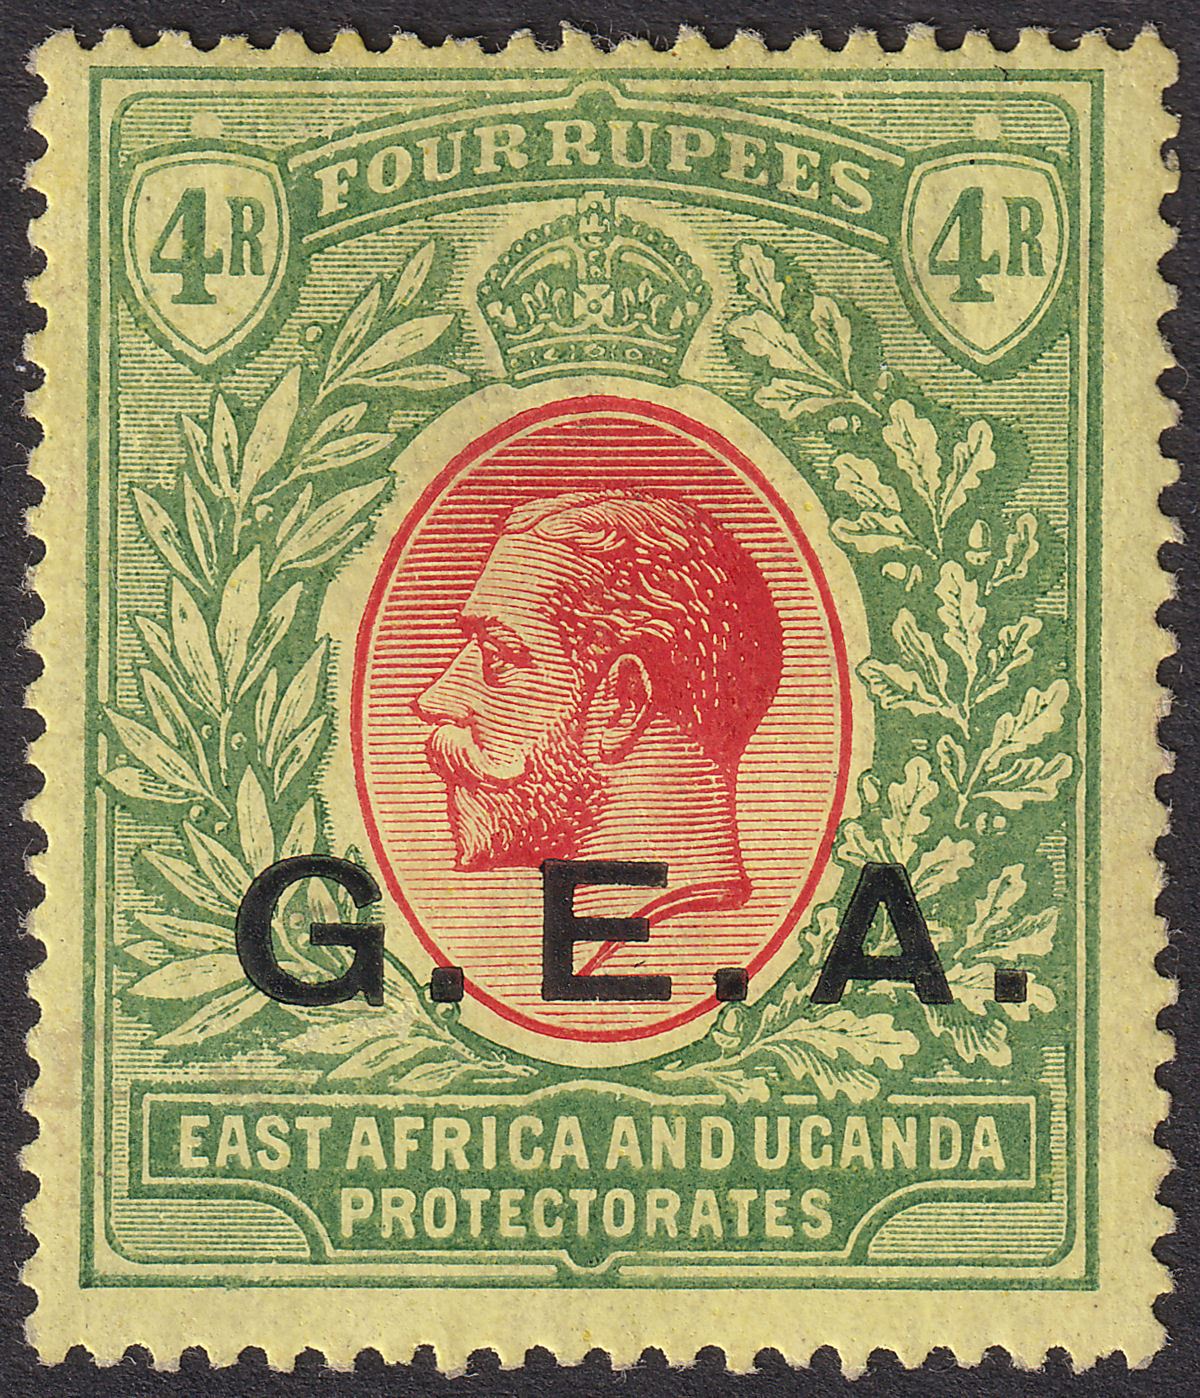 Tanganyika 1917 KGV GEA Opt 4r Red and Green on Yellow Mint SG58 cat £26